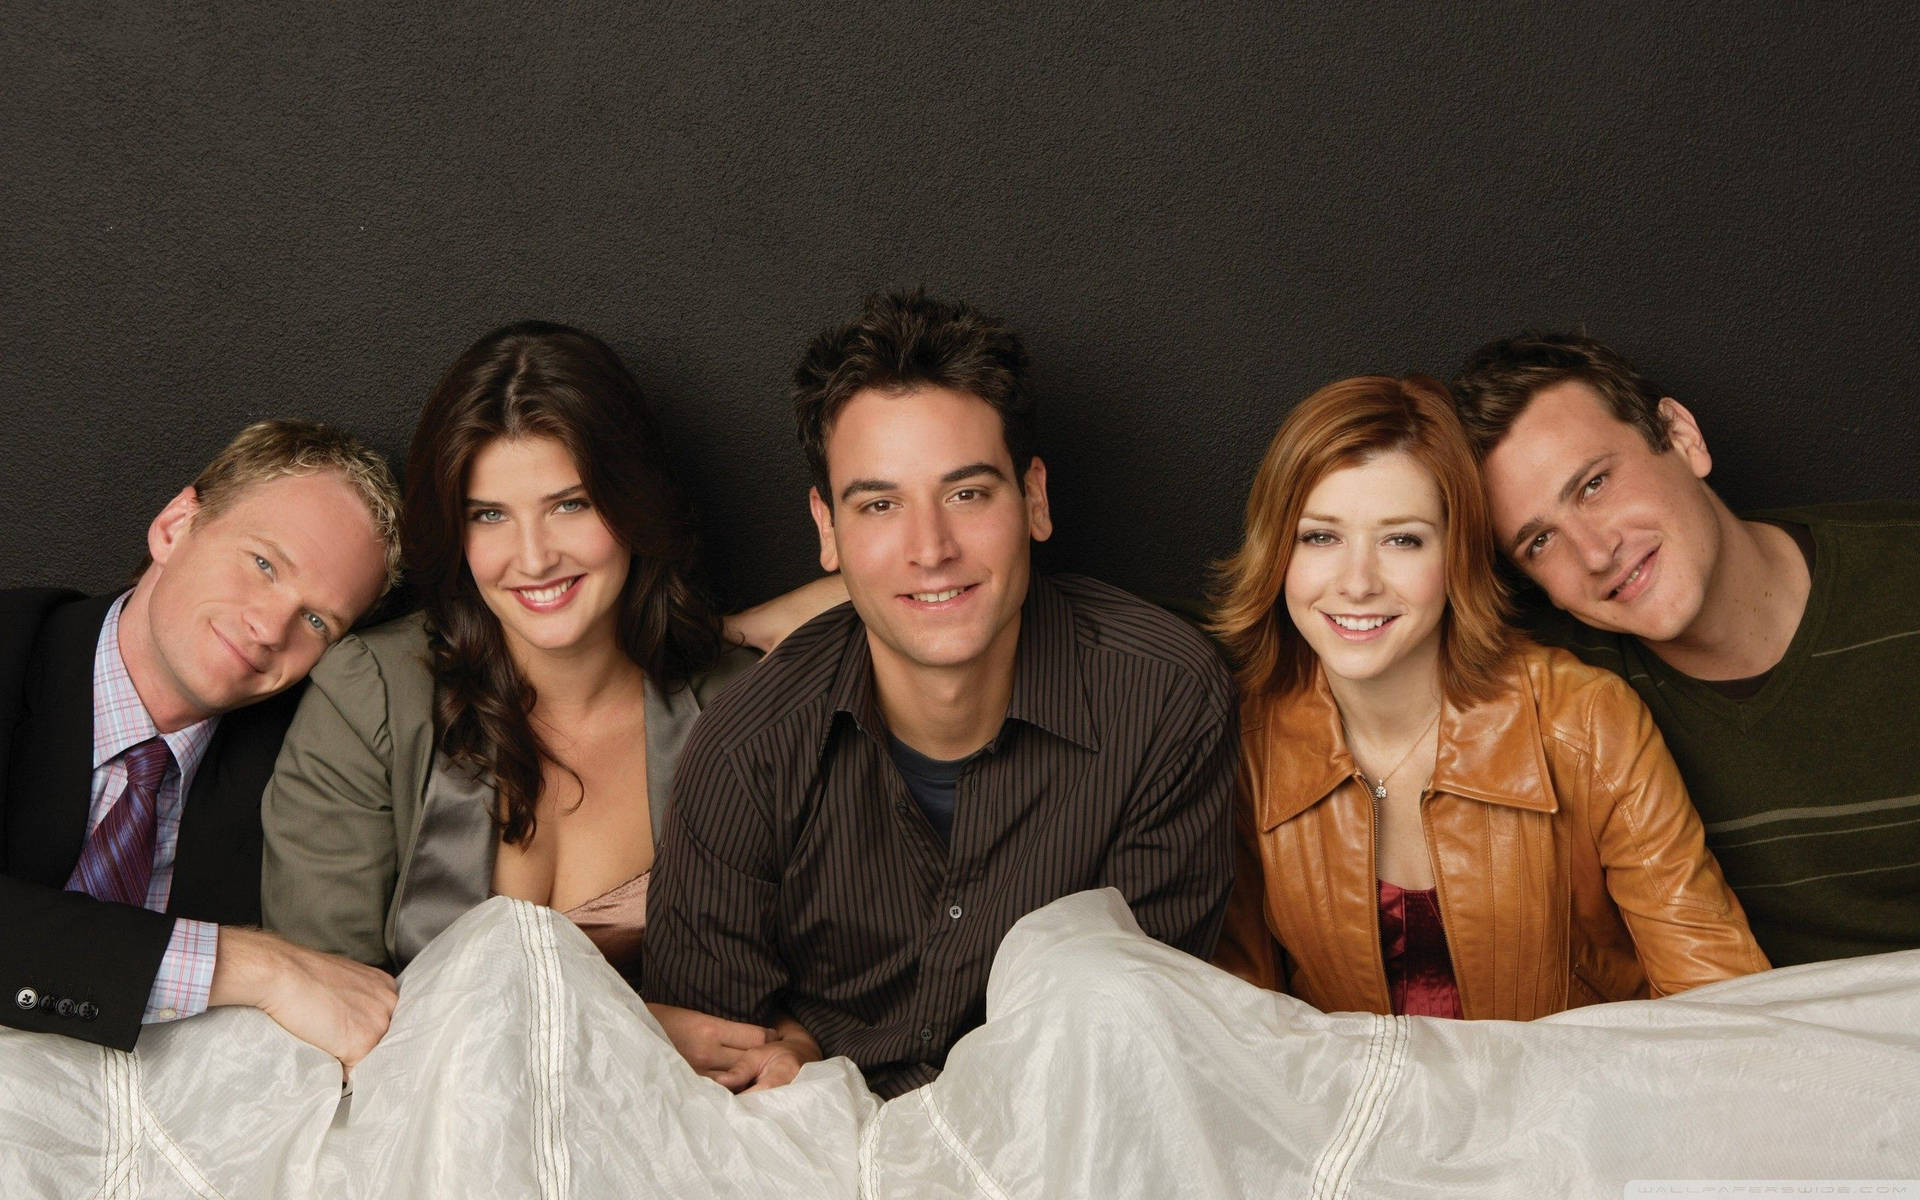 How I Met Your Mother Lily Aldrin And Cast Wallpaper